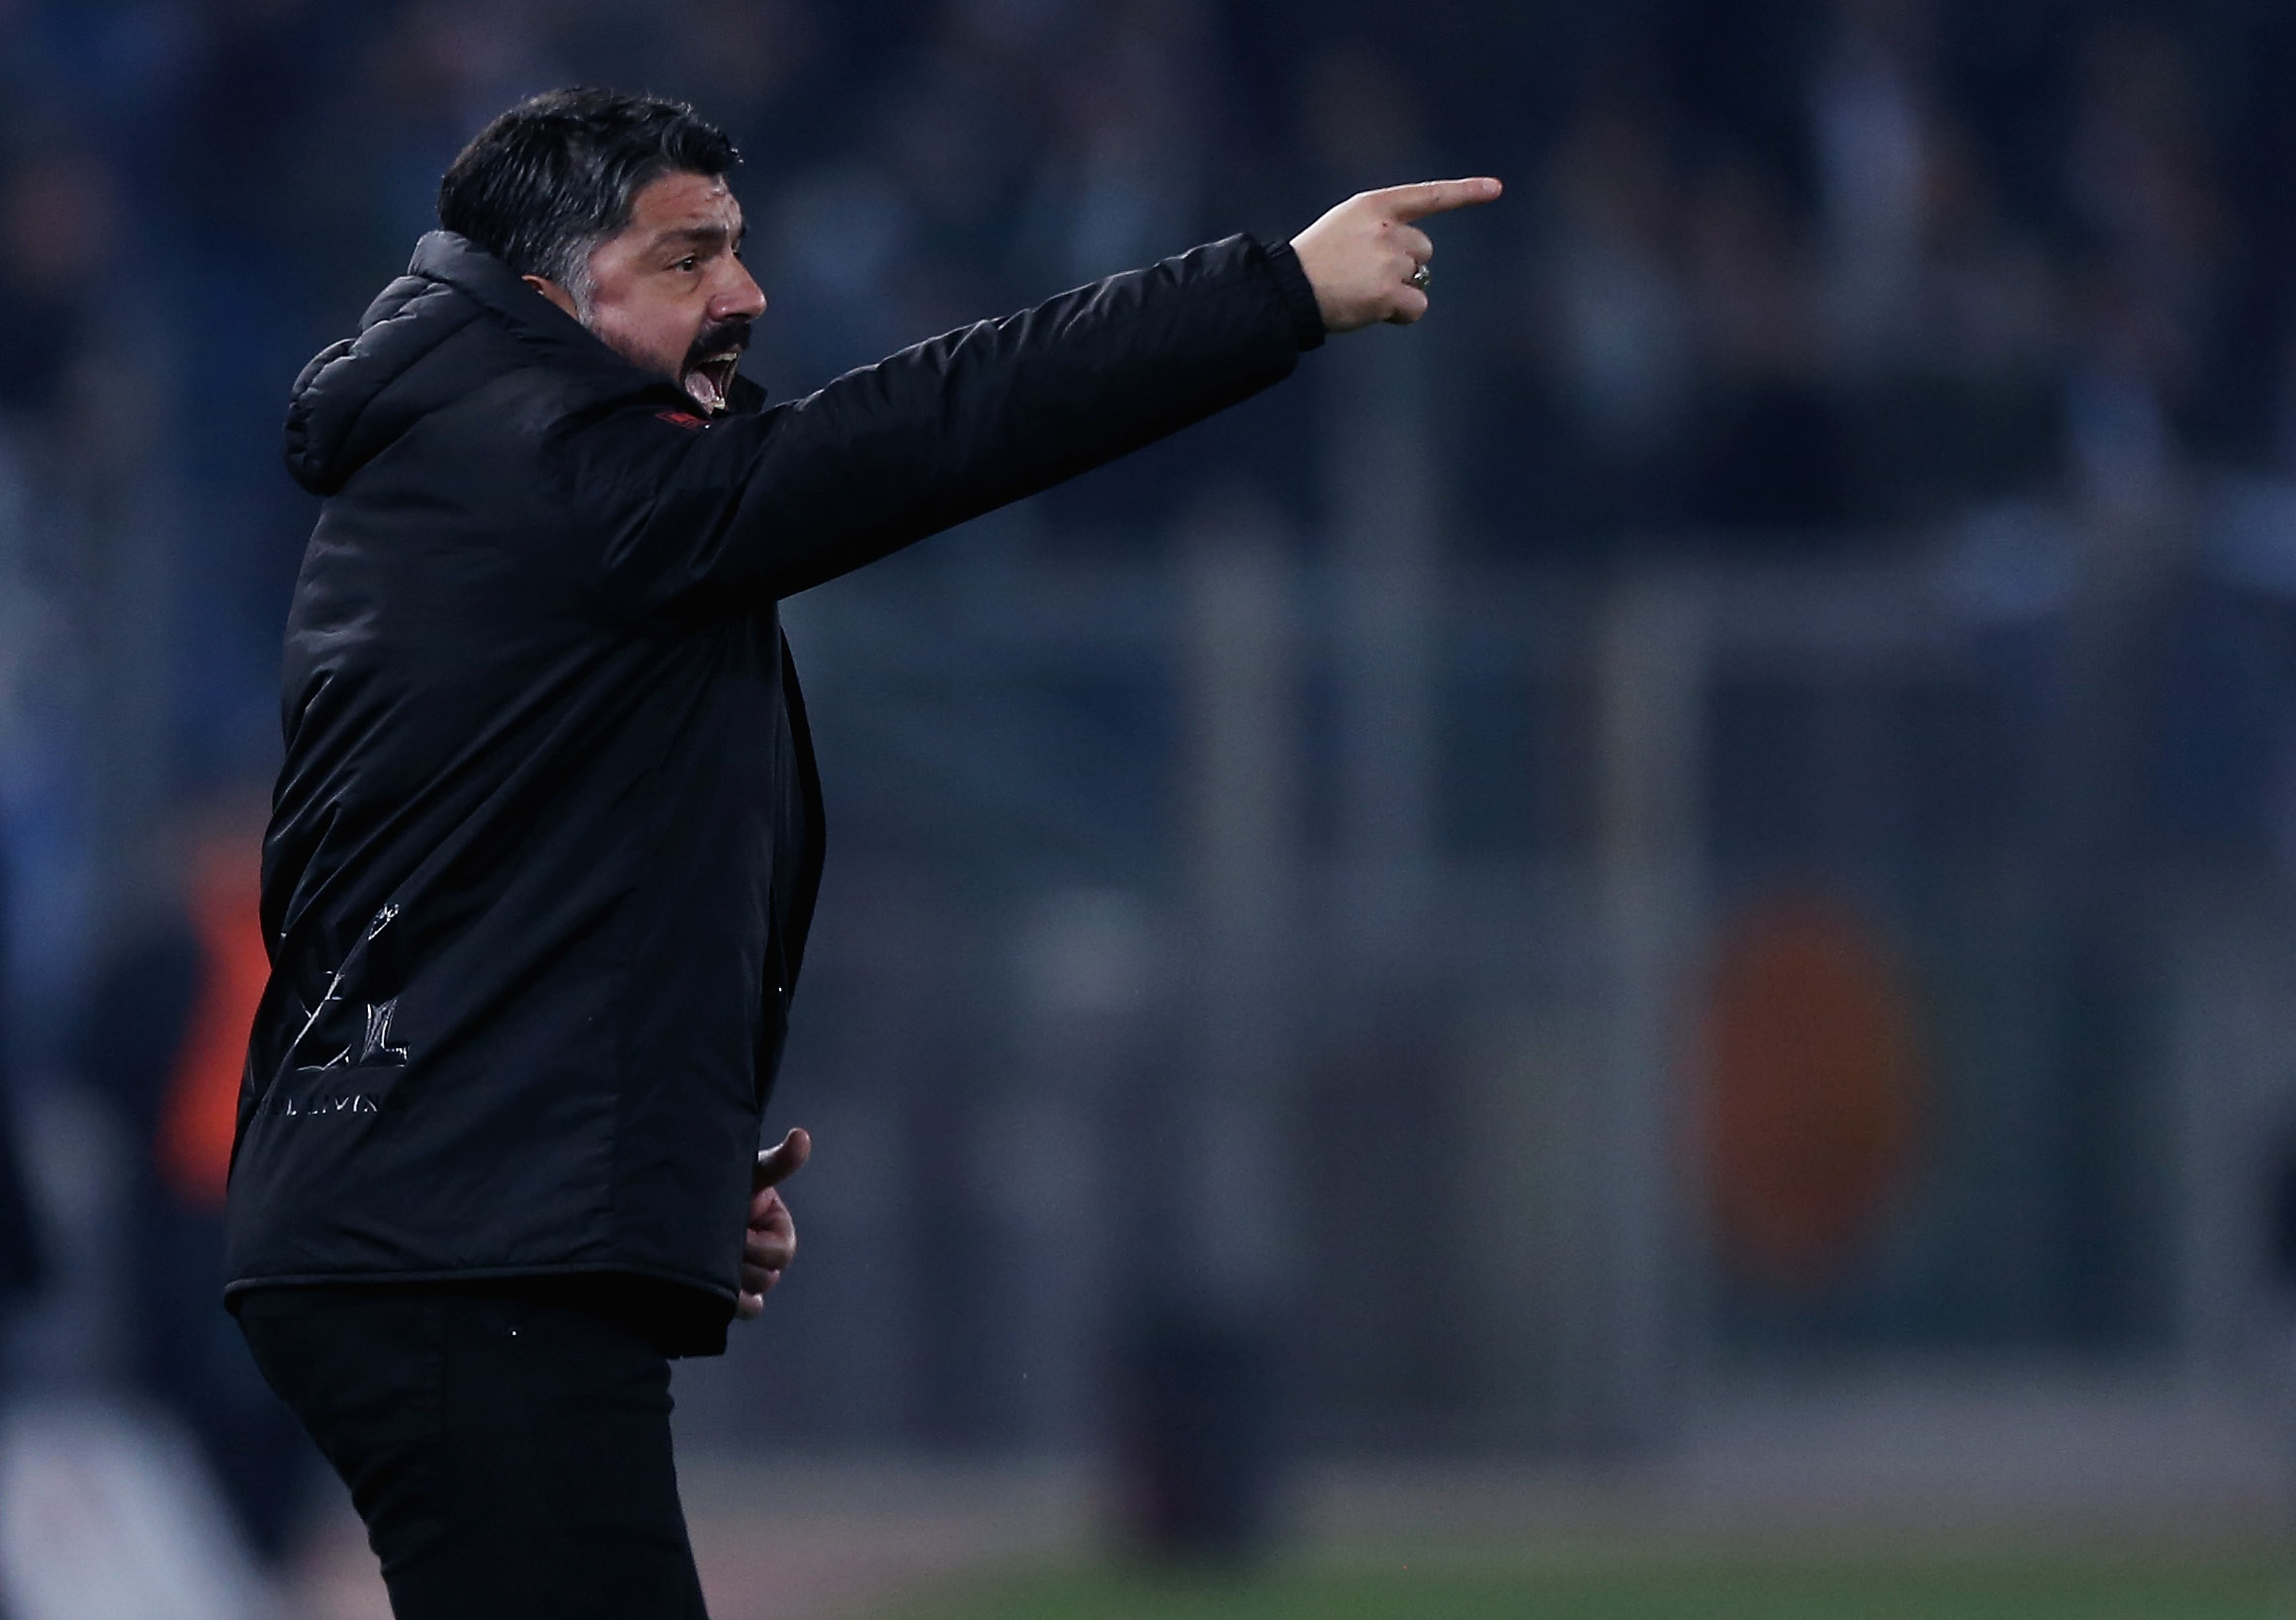 ROME, ITALY - FEBRUARY 26:  AC Milan head coach Gennaro Gattuso gestures during the Coppa Italia match between SS Lazio and AC Milan on February 26, 2019 in Rome, Italy.  (Photo by Paolo Bruno/Getty Images)